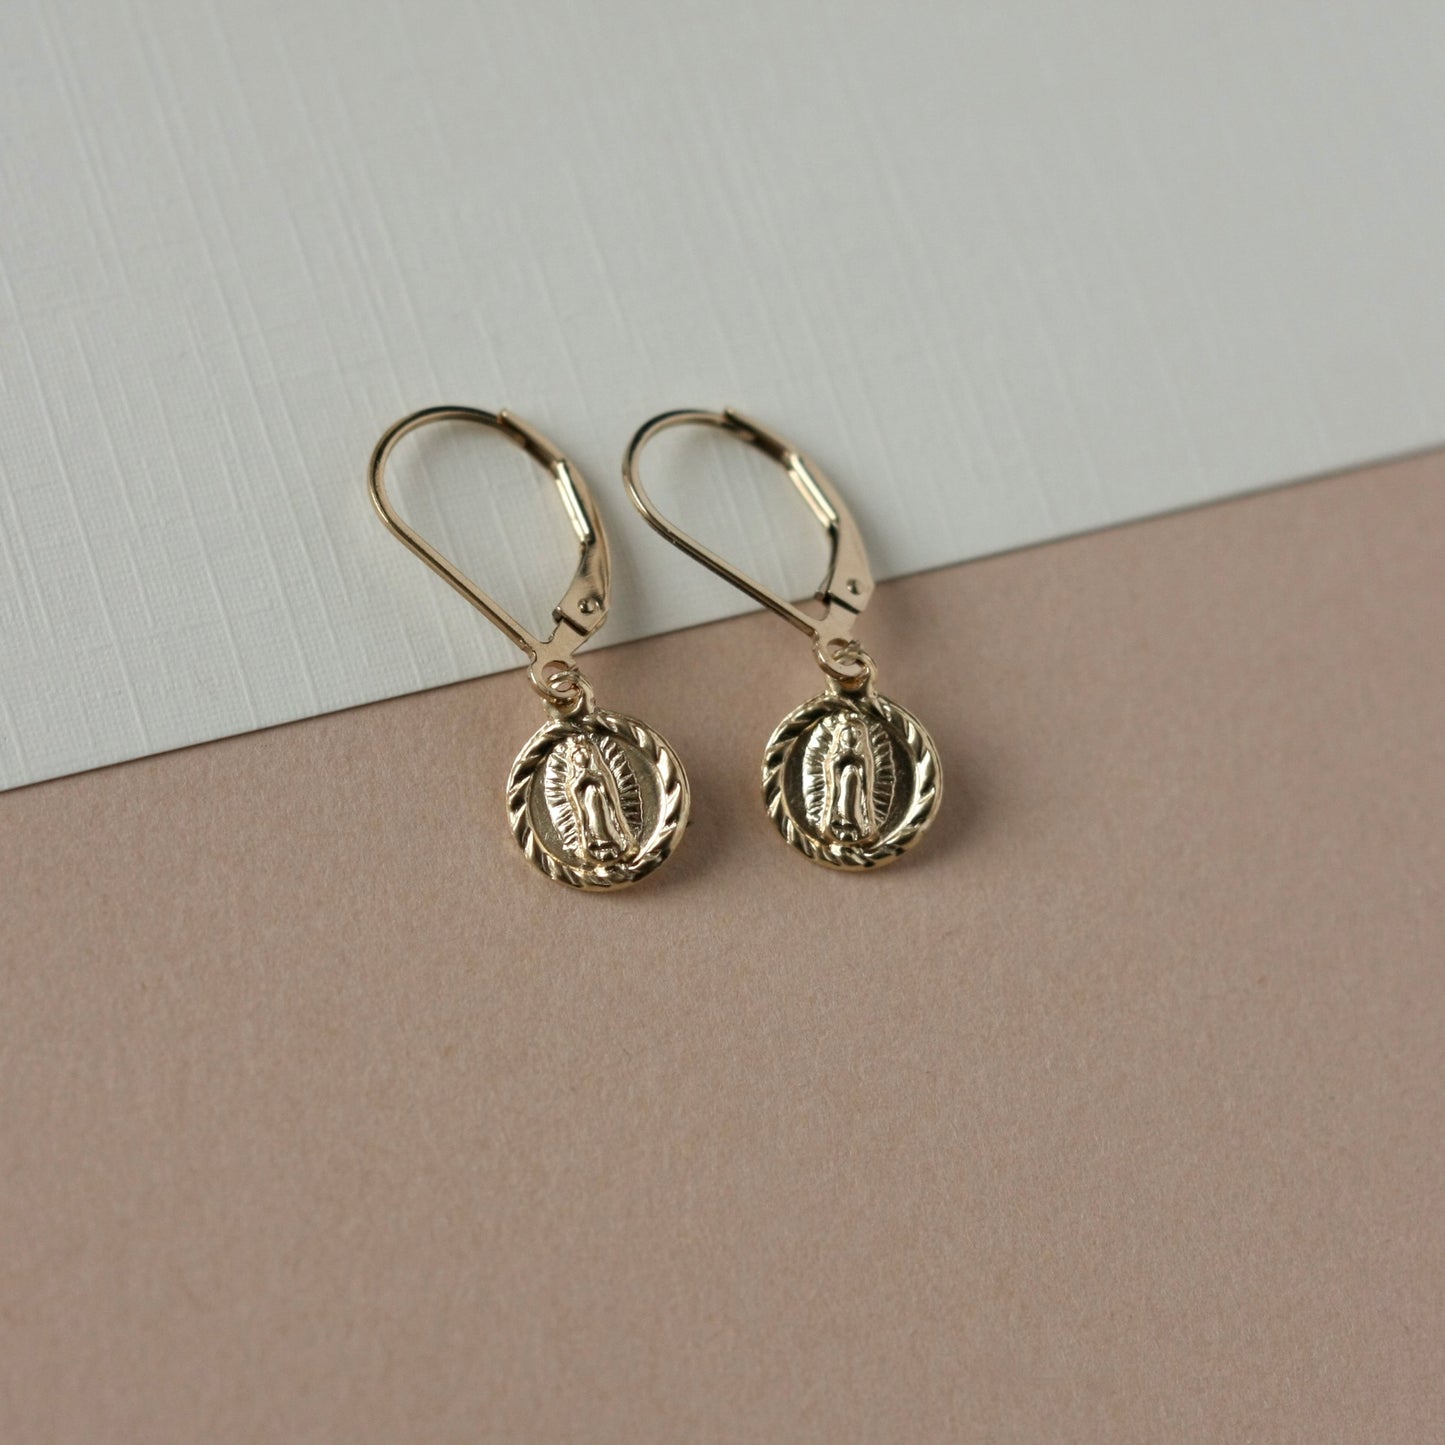 Dainty Round Gold Charm Lever back Earrings